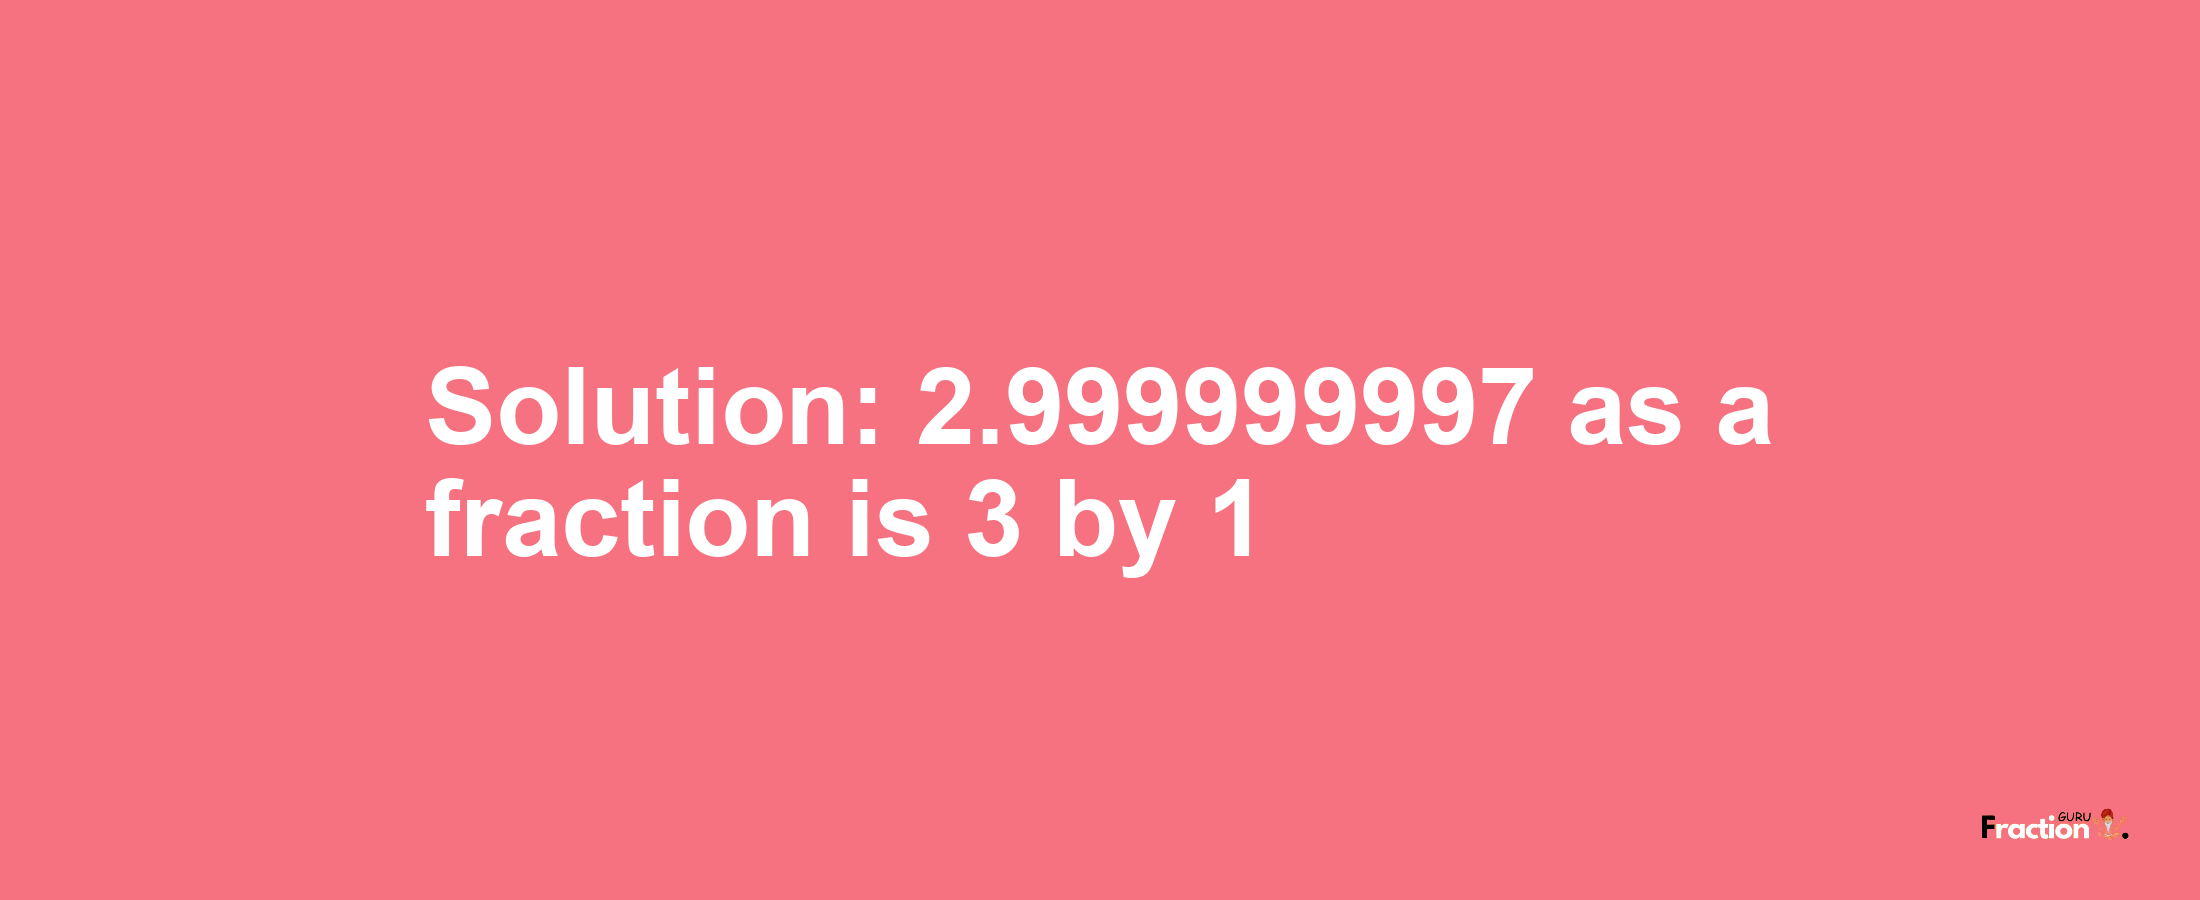 Solution:2.999999997 as a fraction is 3/1